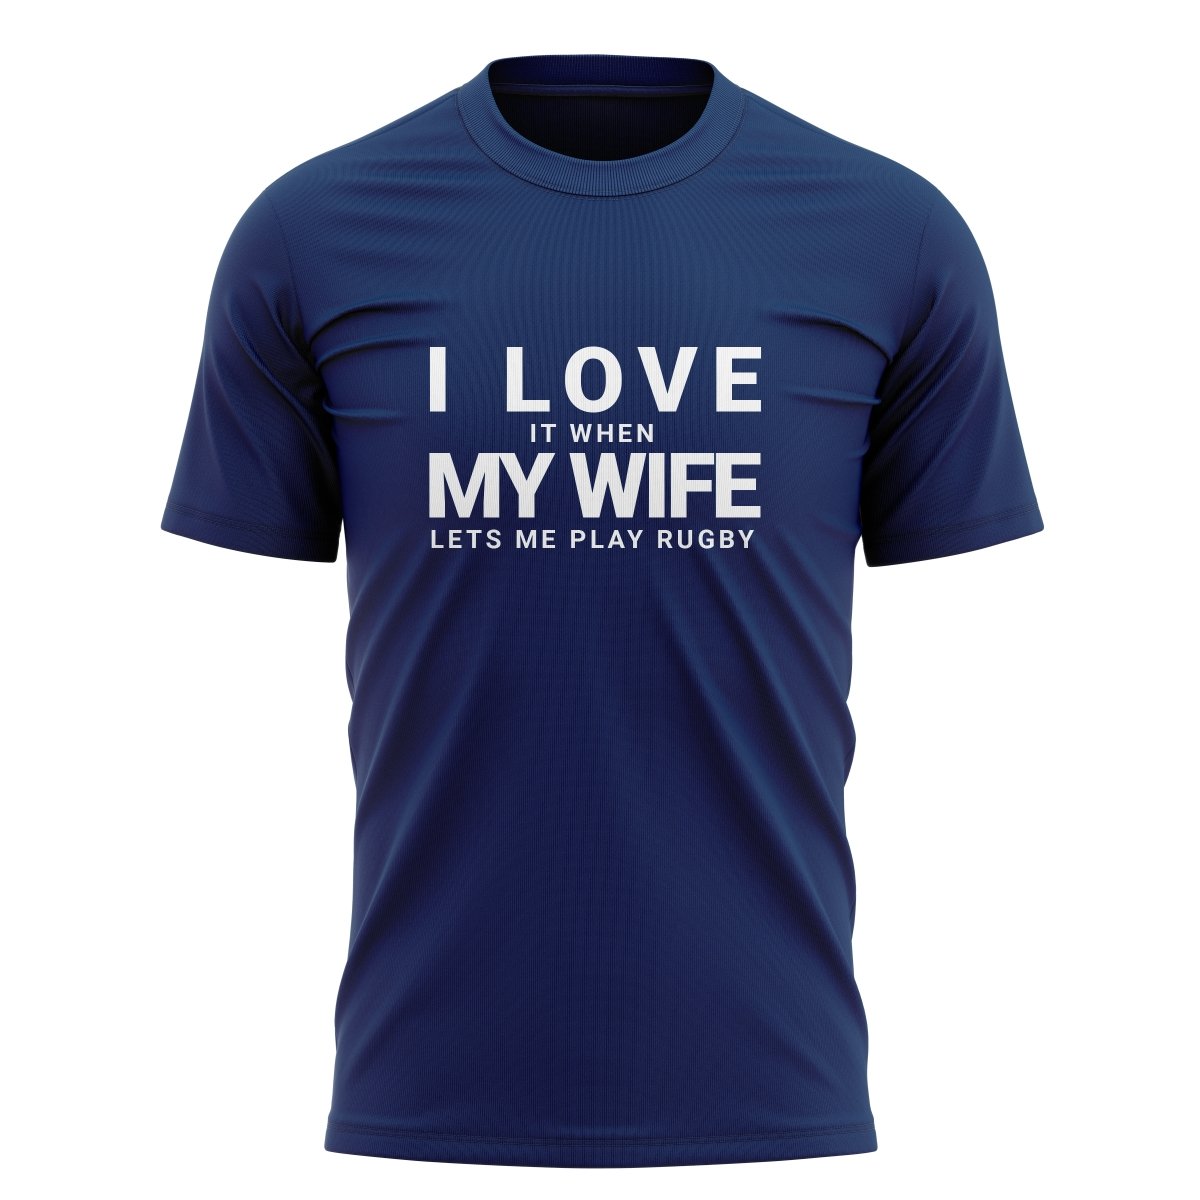 I Love My Wife Graphic Tee - www.therugbyshop.com www.therugbyshop.com MEN&#39;S / NAVY / S SANMAR TEES I Love My Wife Graphic Tee